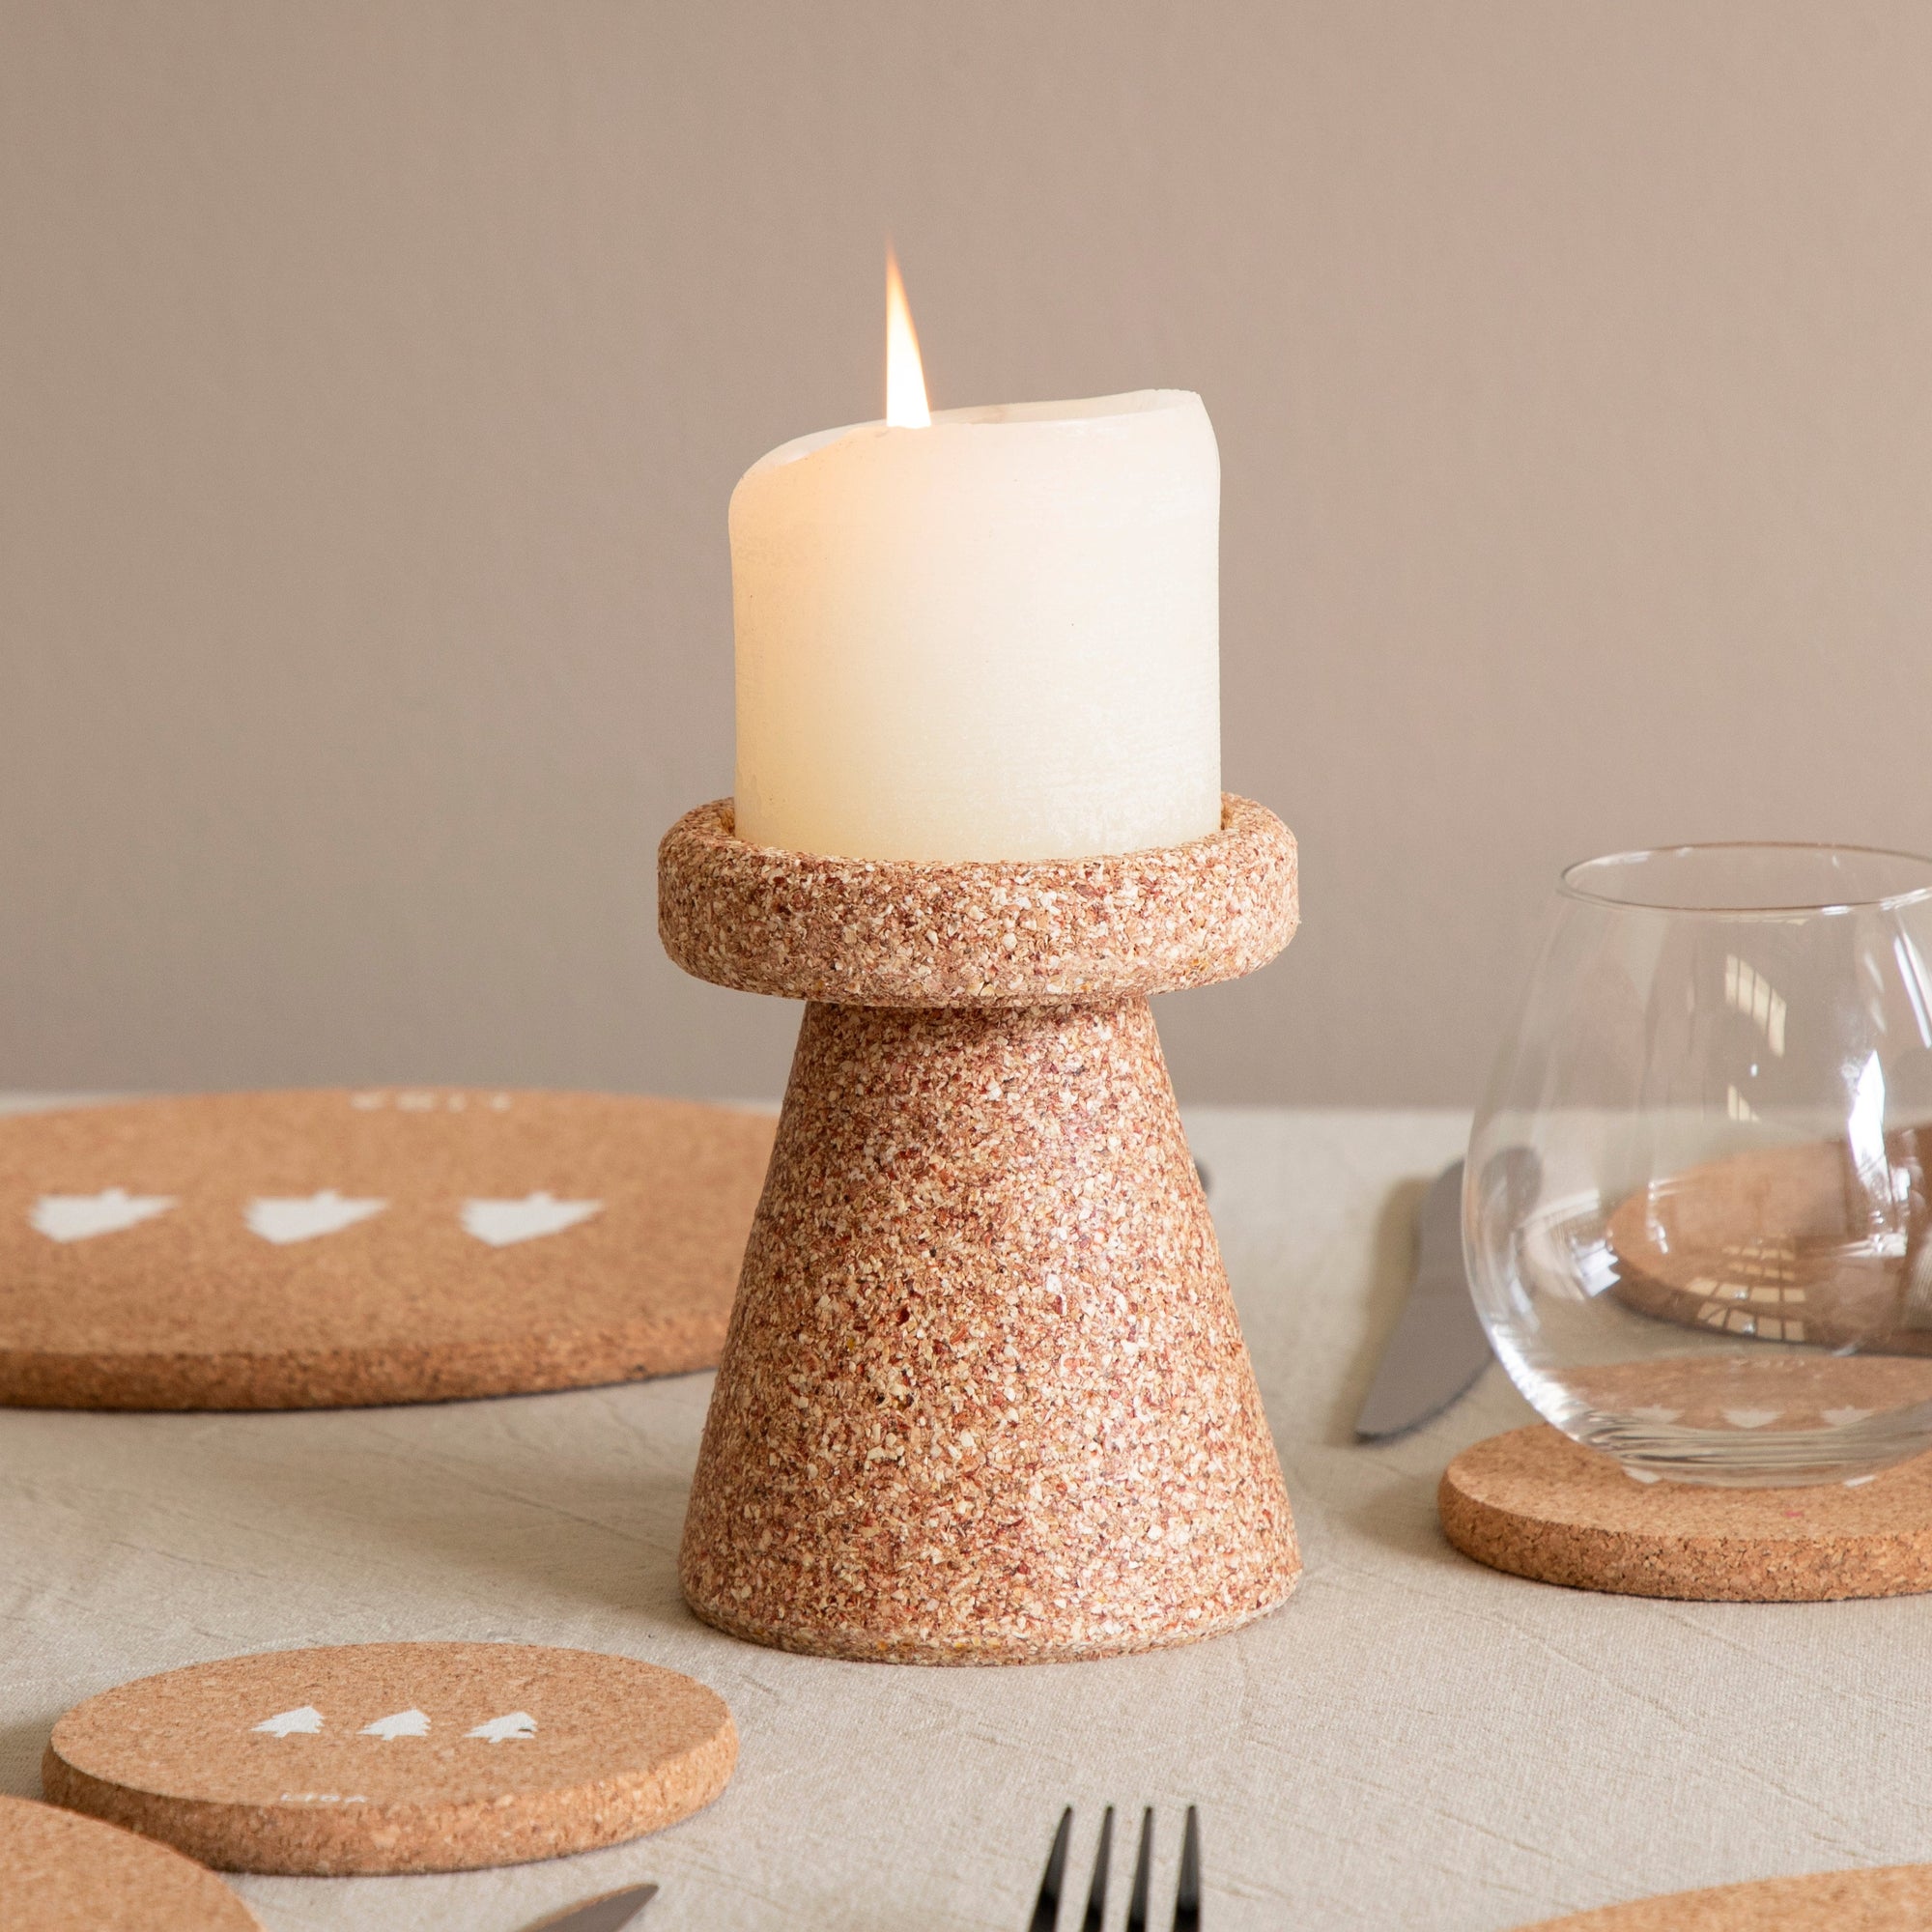 Buy 2 get 1 free - Candle Holders